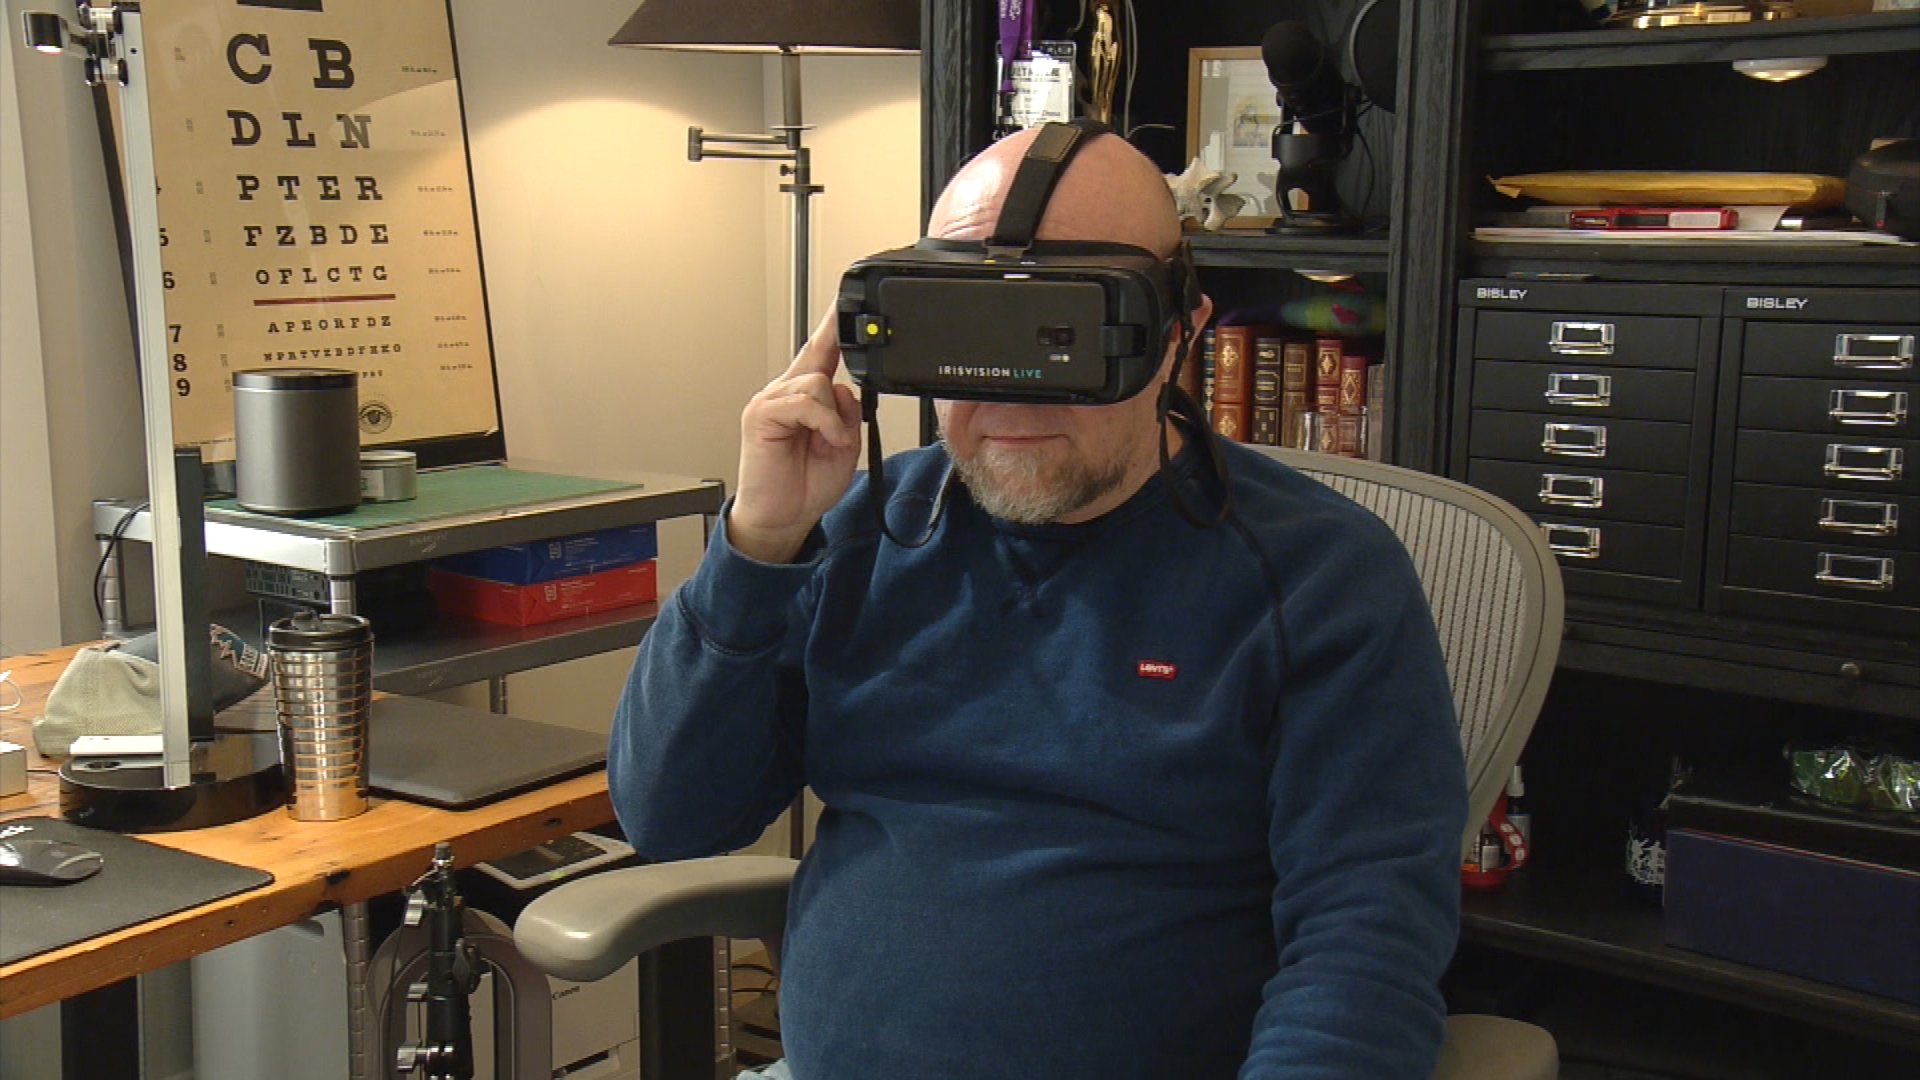 Electronic Headset Helps Legally Blind Colorado Graphic Designer See - CBS Denver